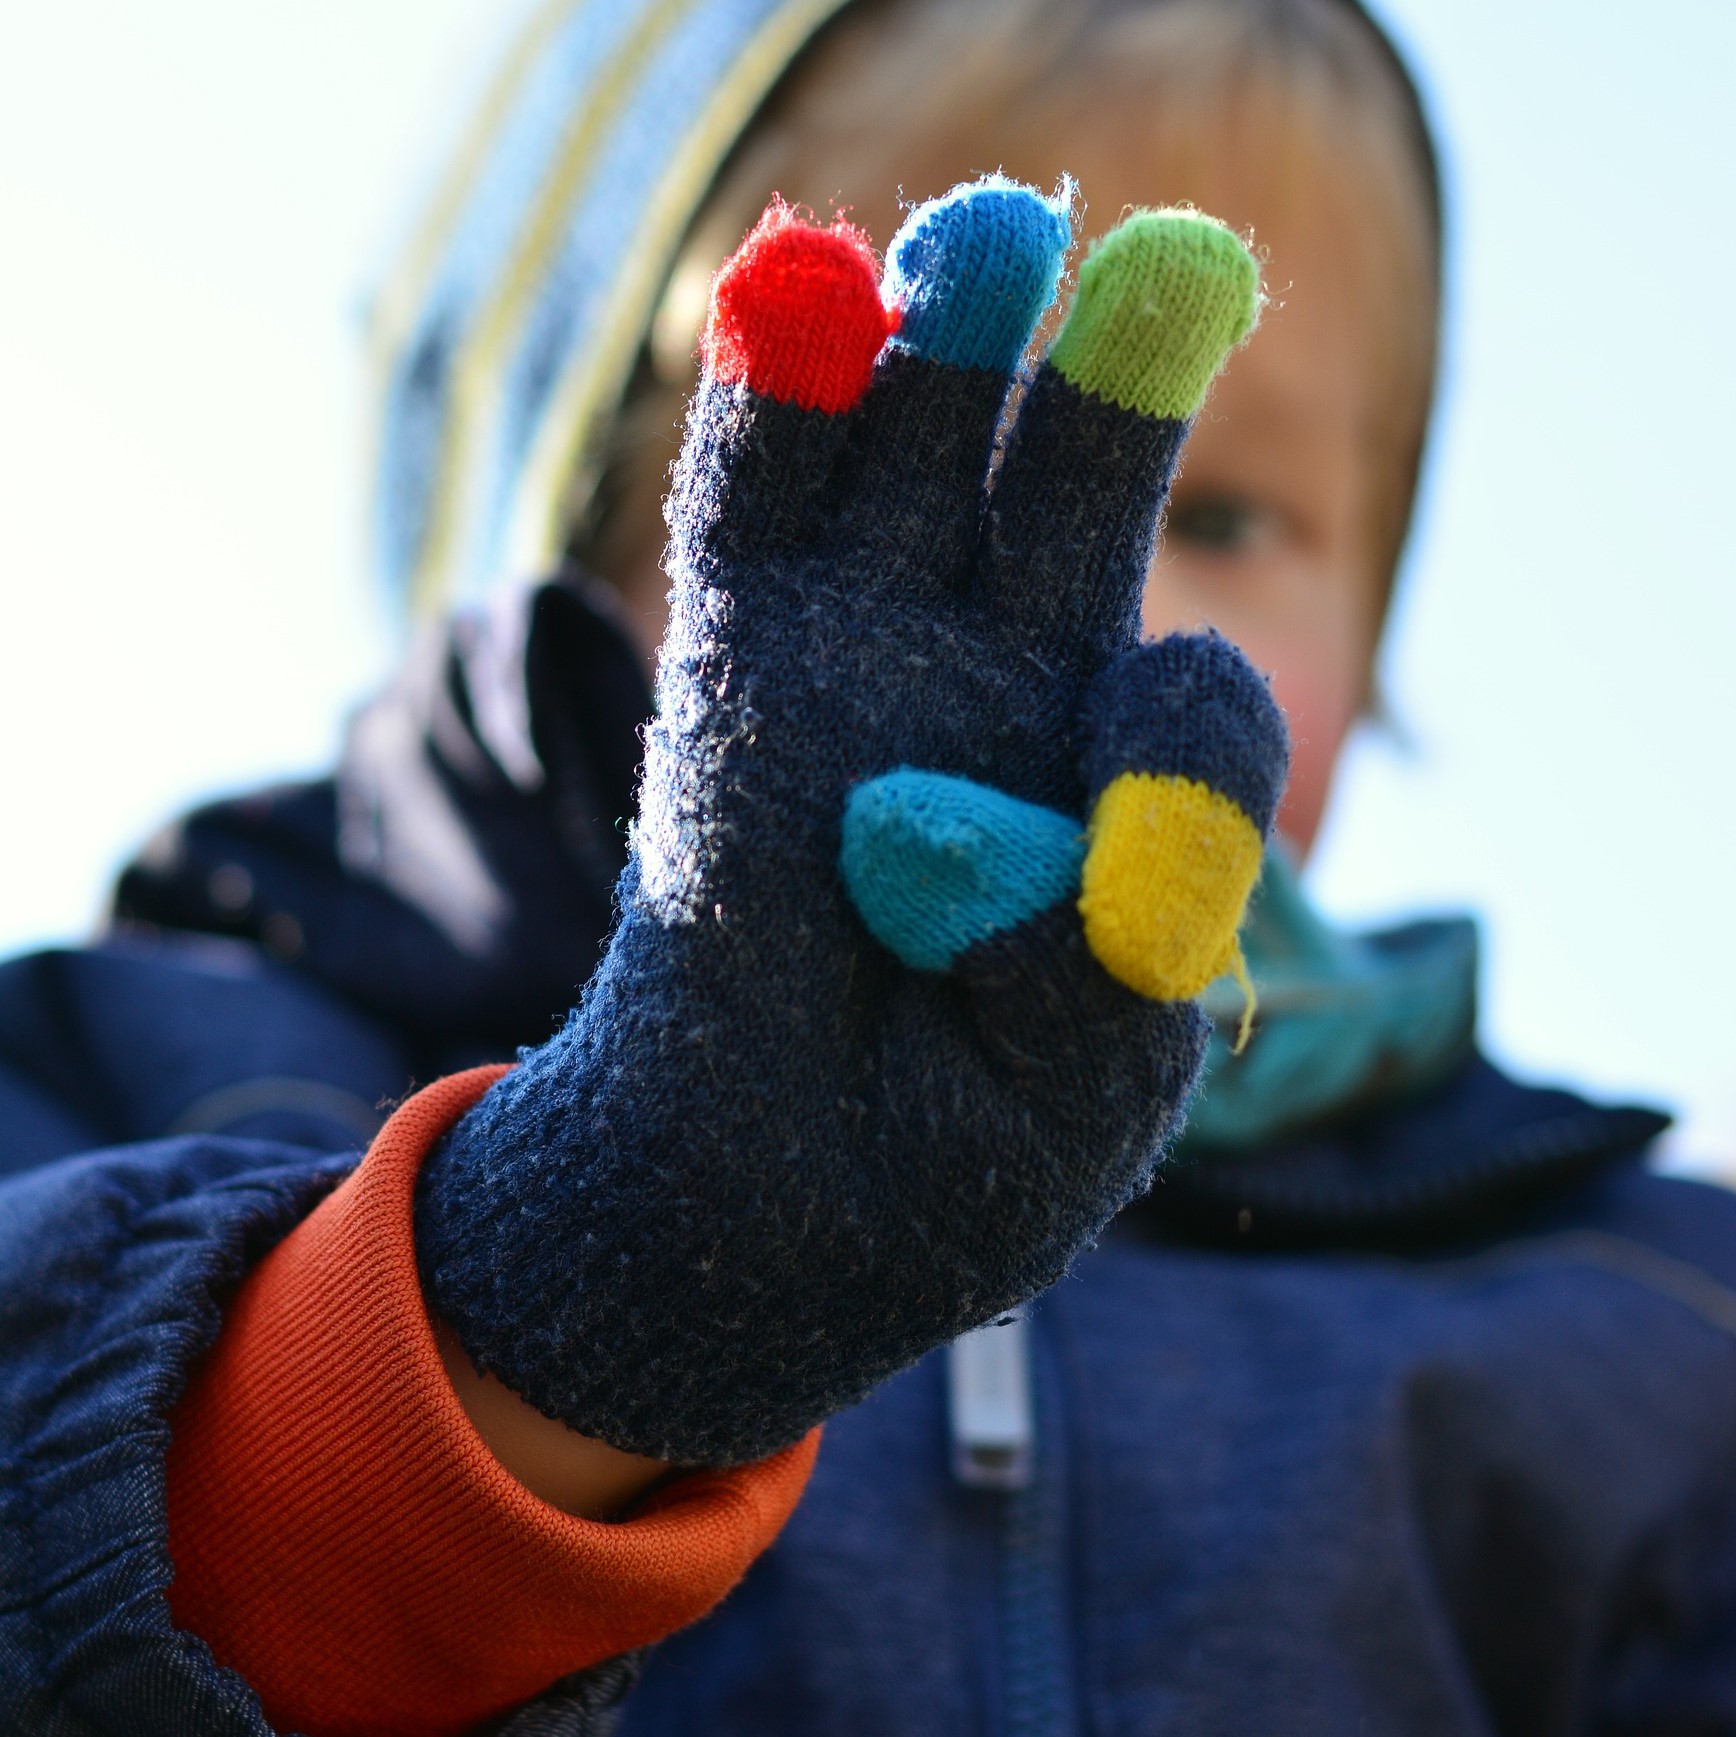 A young child with their hand extended towards the camera, with three fingers up. They are wearing woollen gloves and a hooded coat.